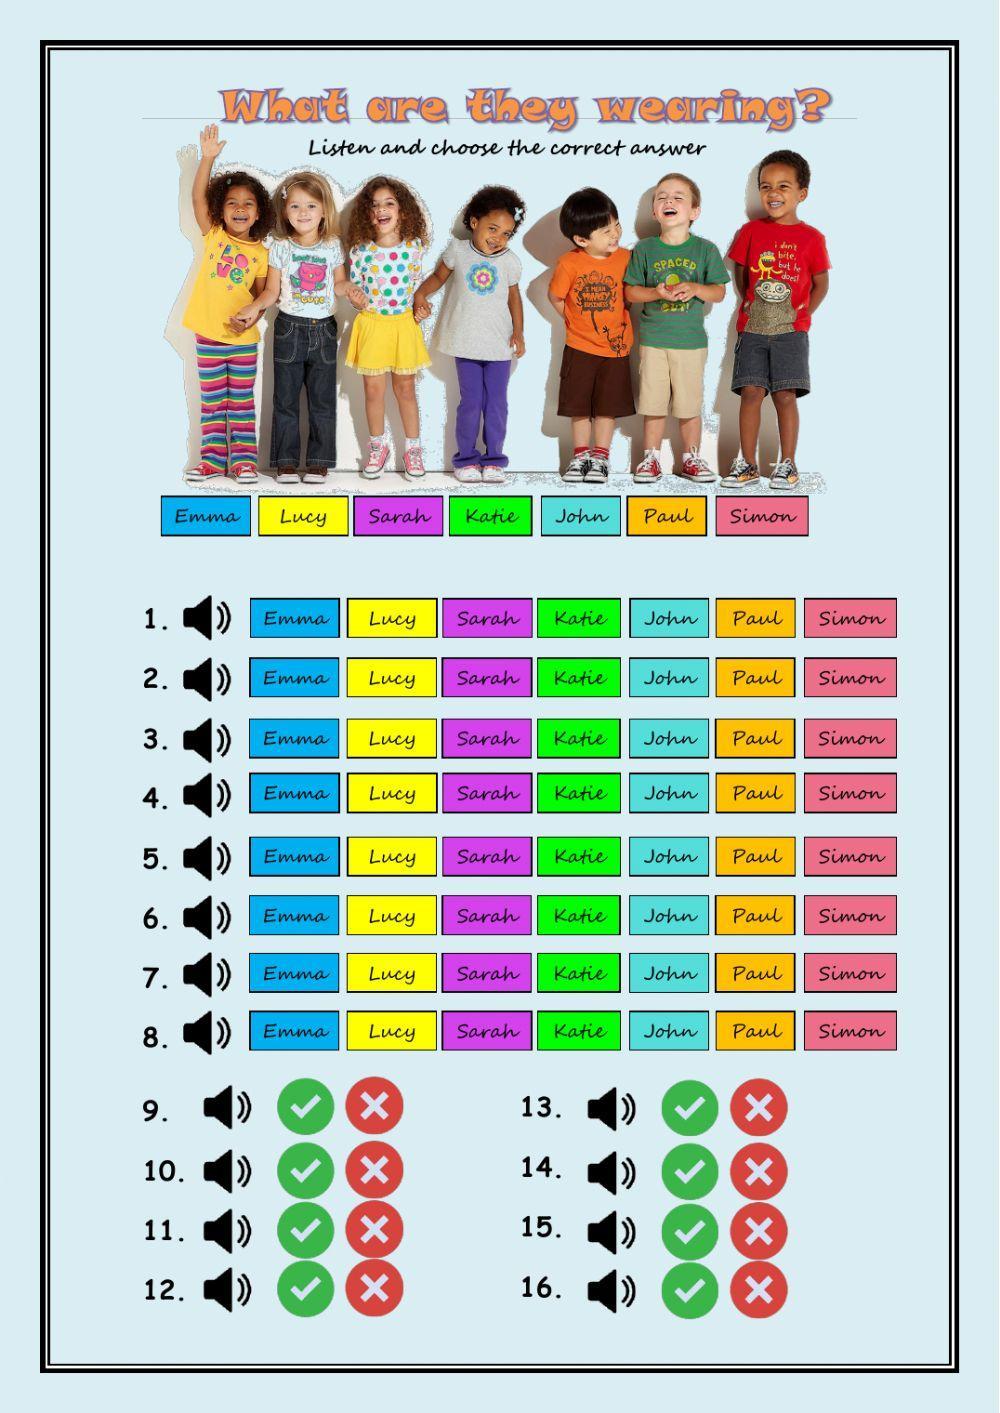 What are they wearing? online exercise for Primary 1